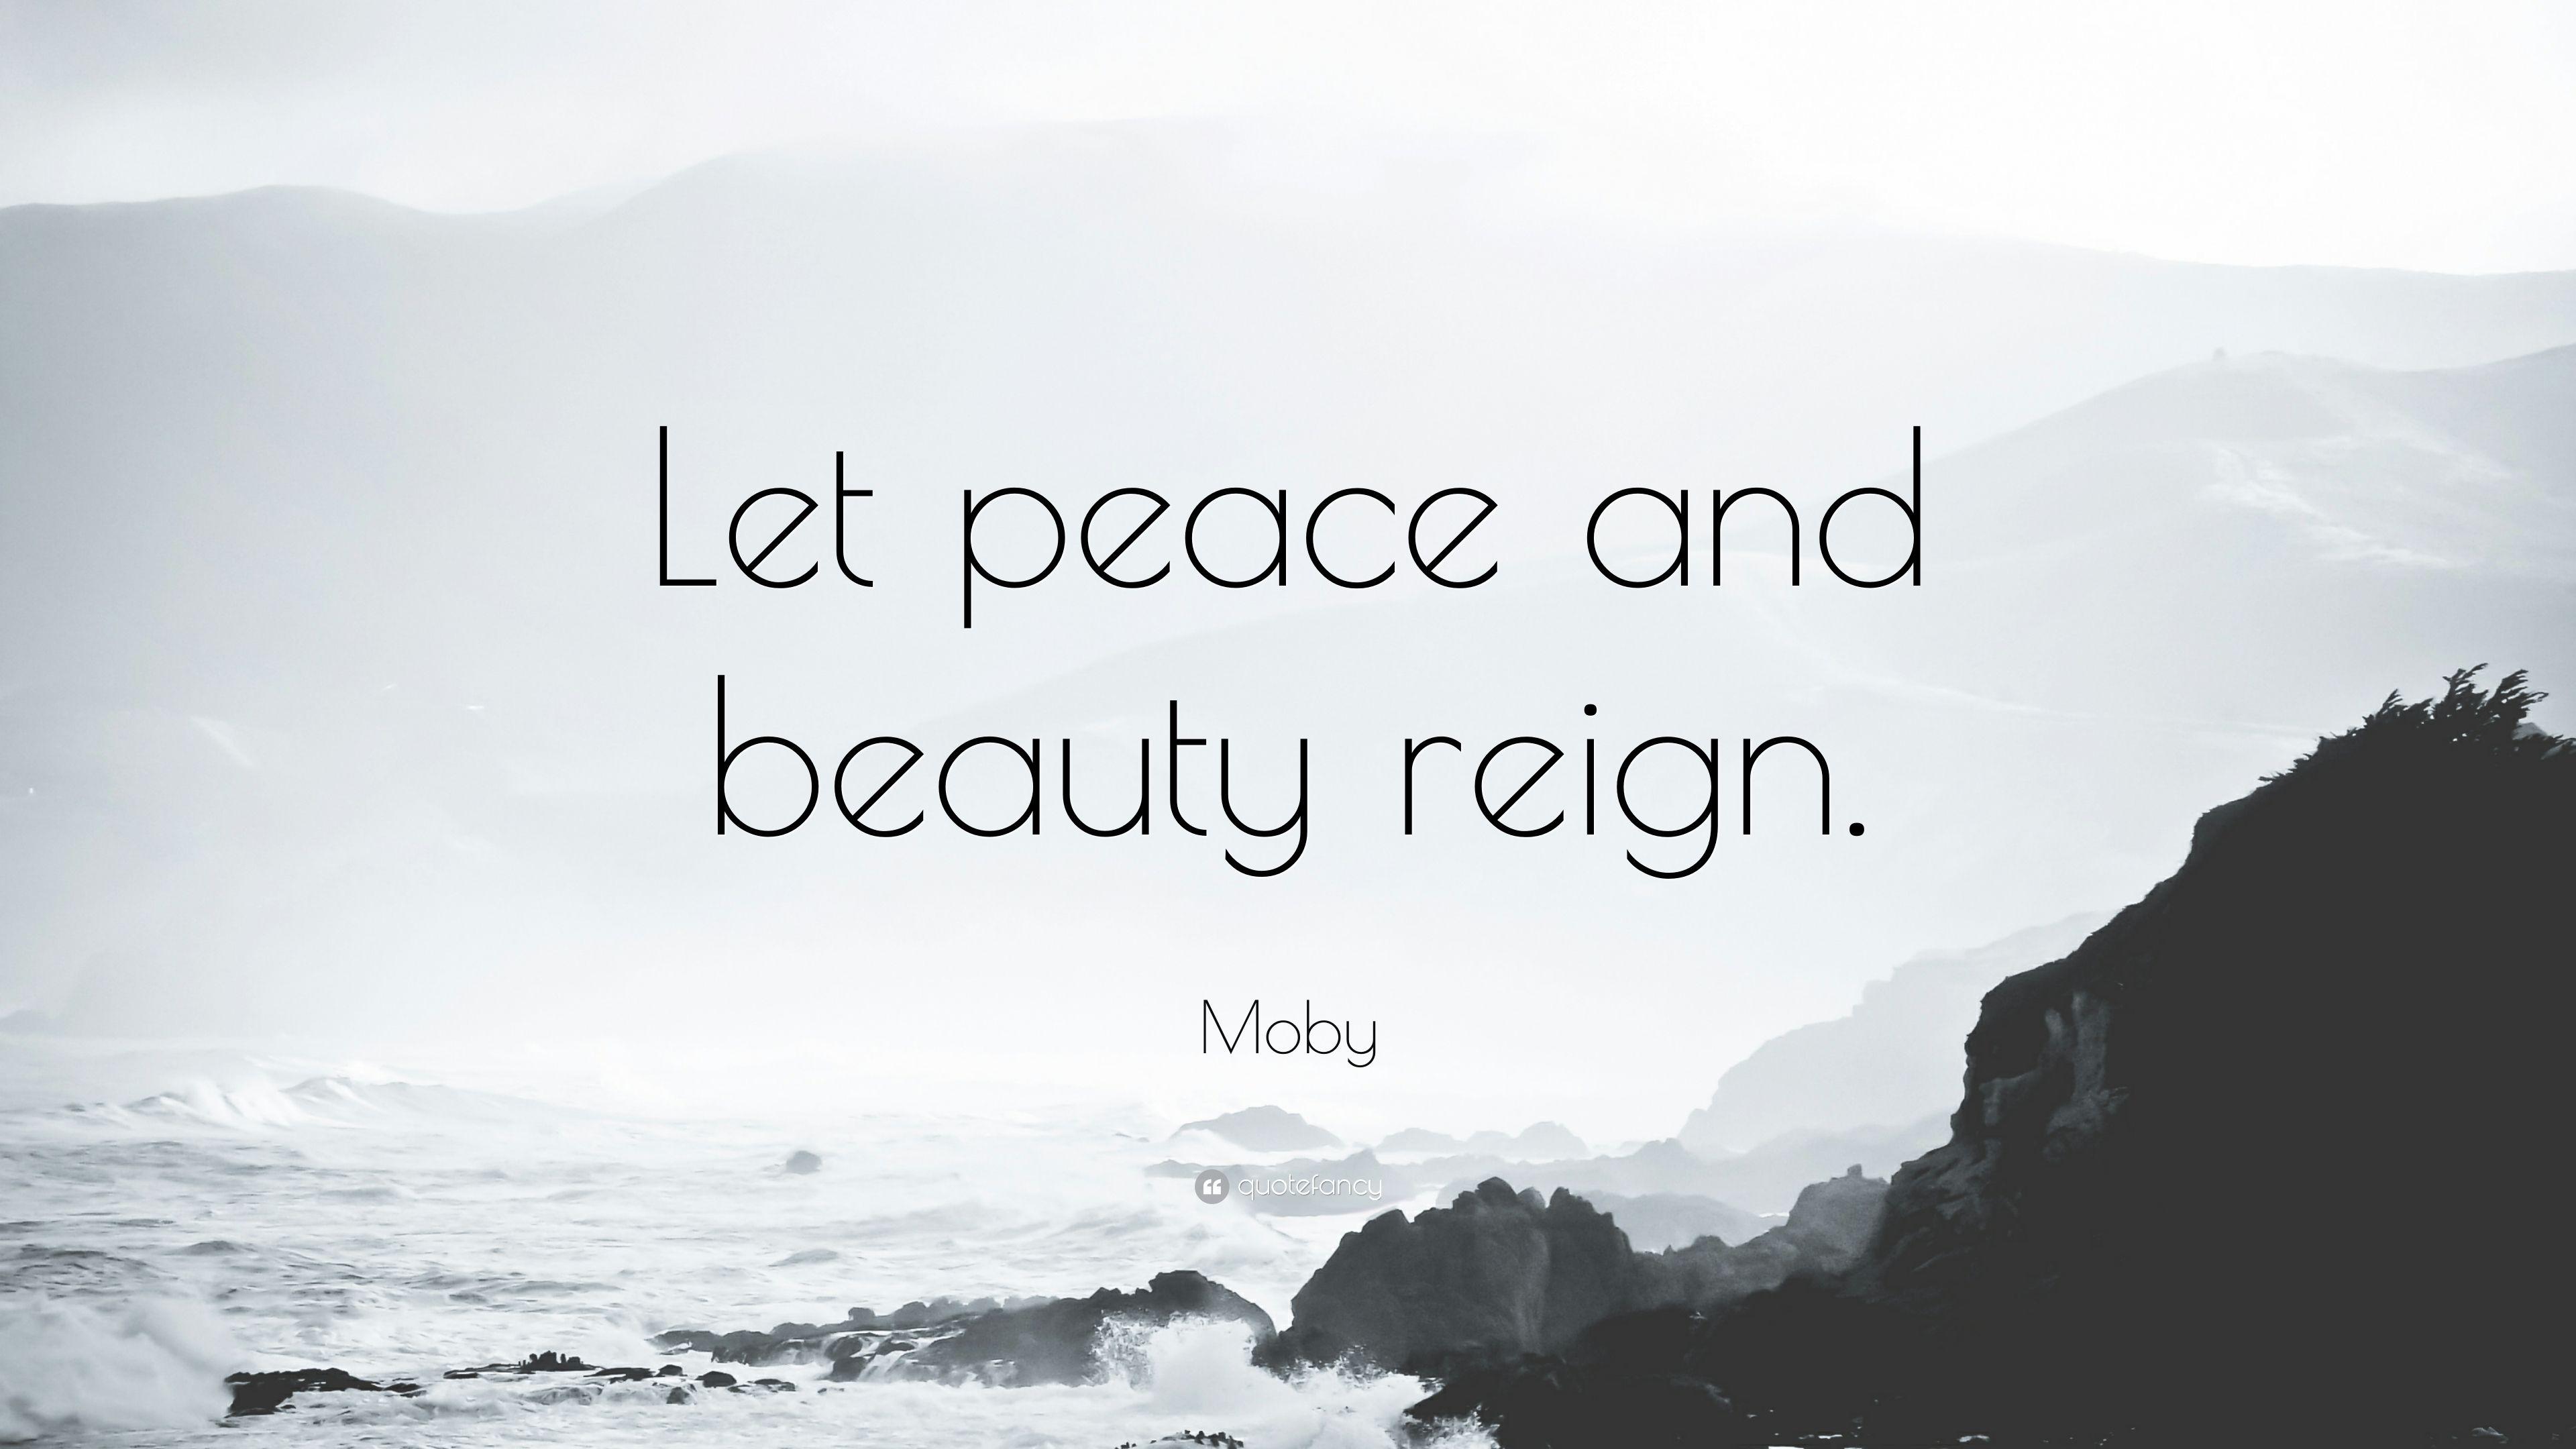 Moby Quote: “Let peace and beauty reign.” (7 wallpaper)